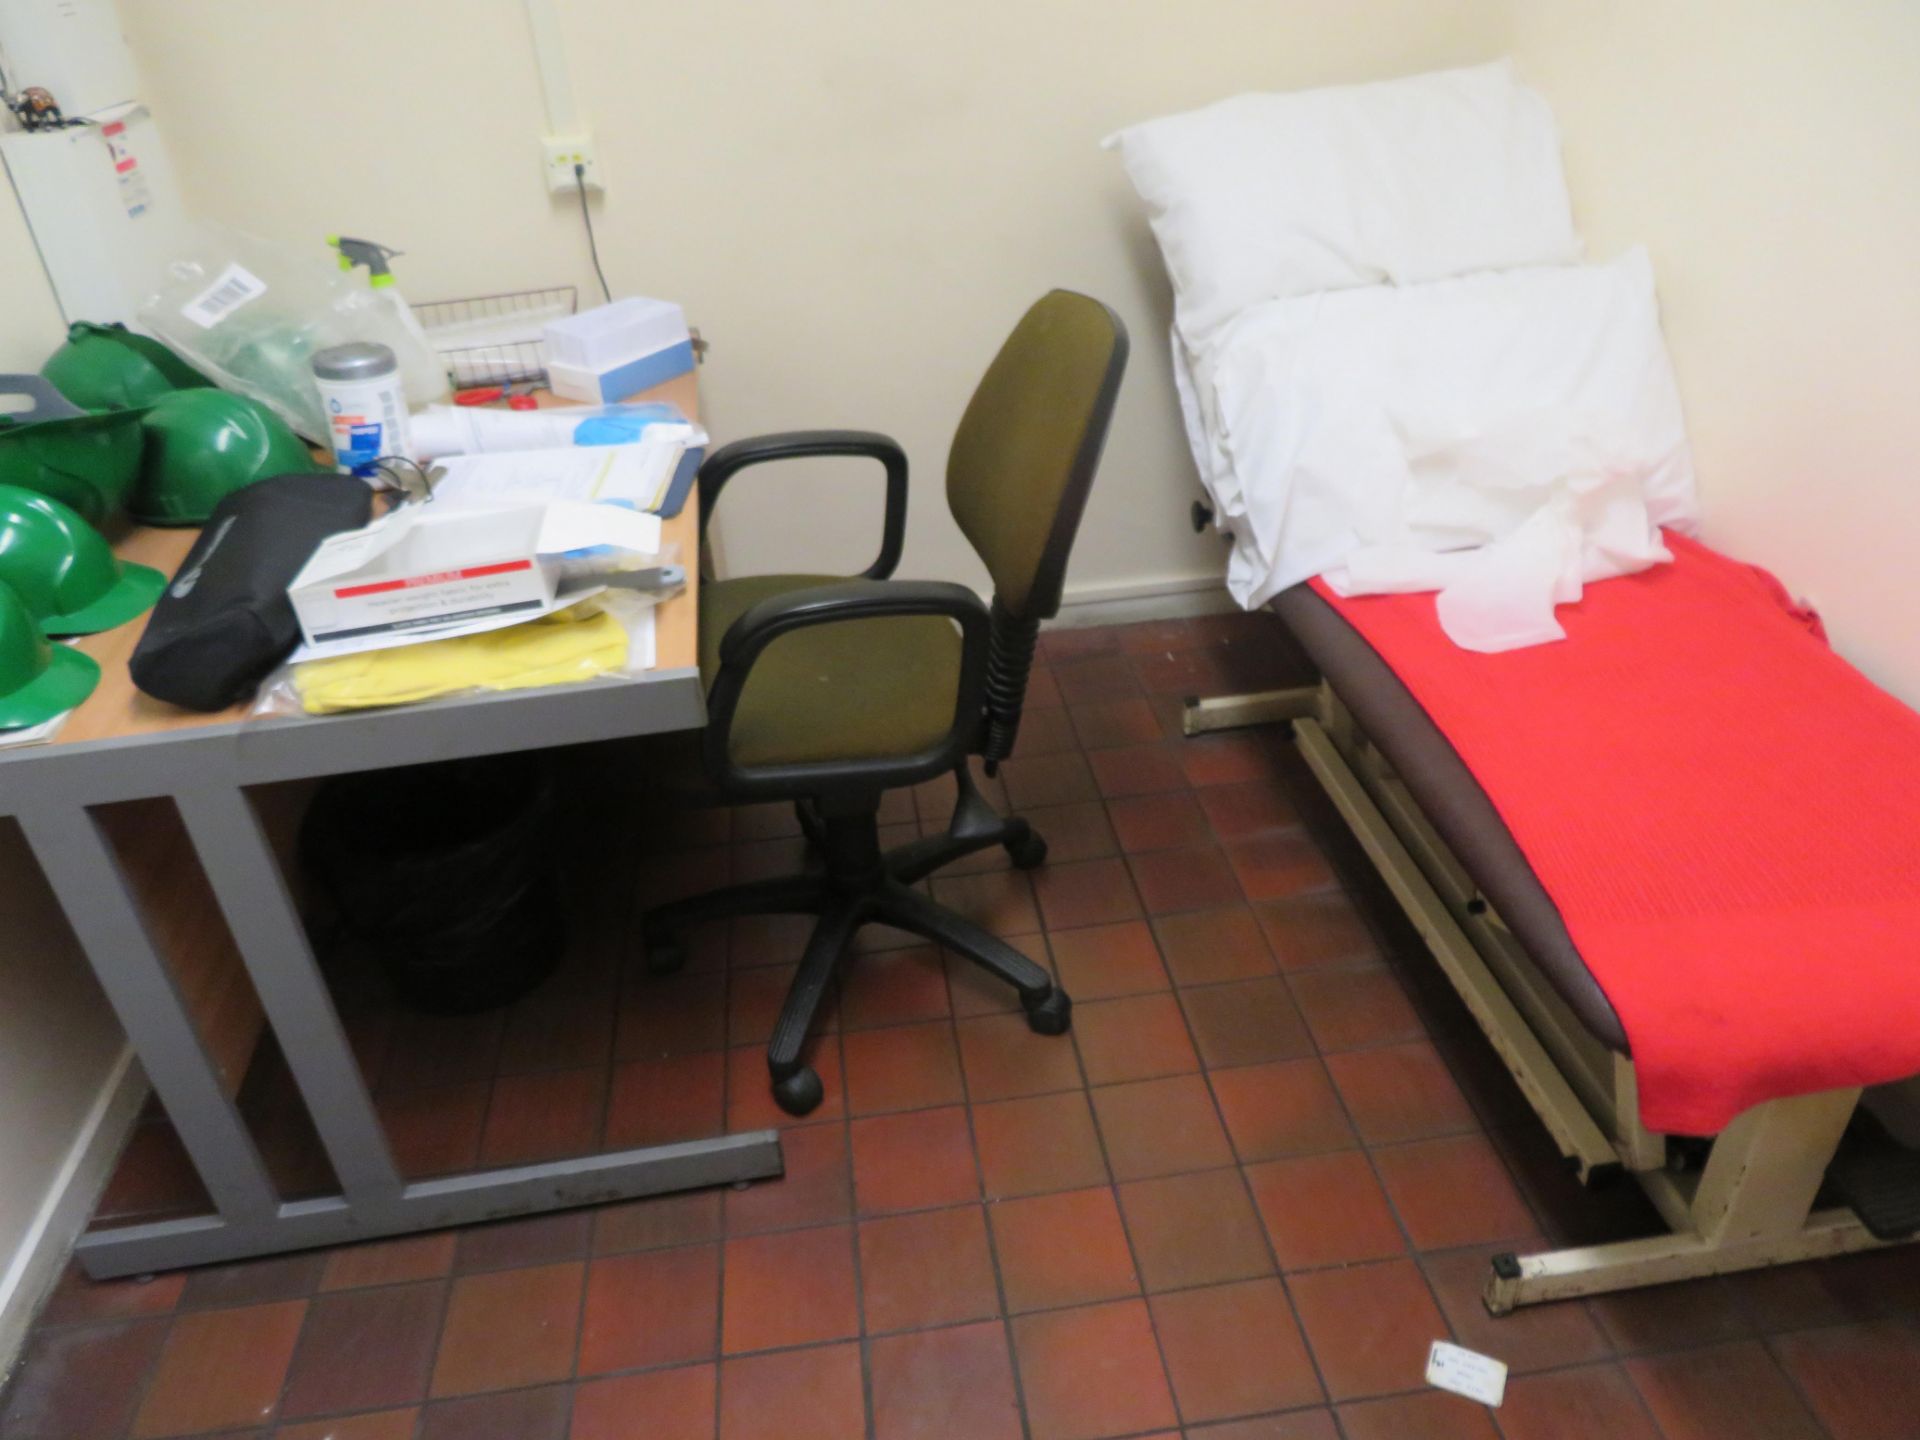 Loose and Removable Contents to First Aid Room I - Image 2 of 2